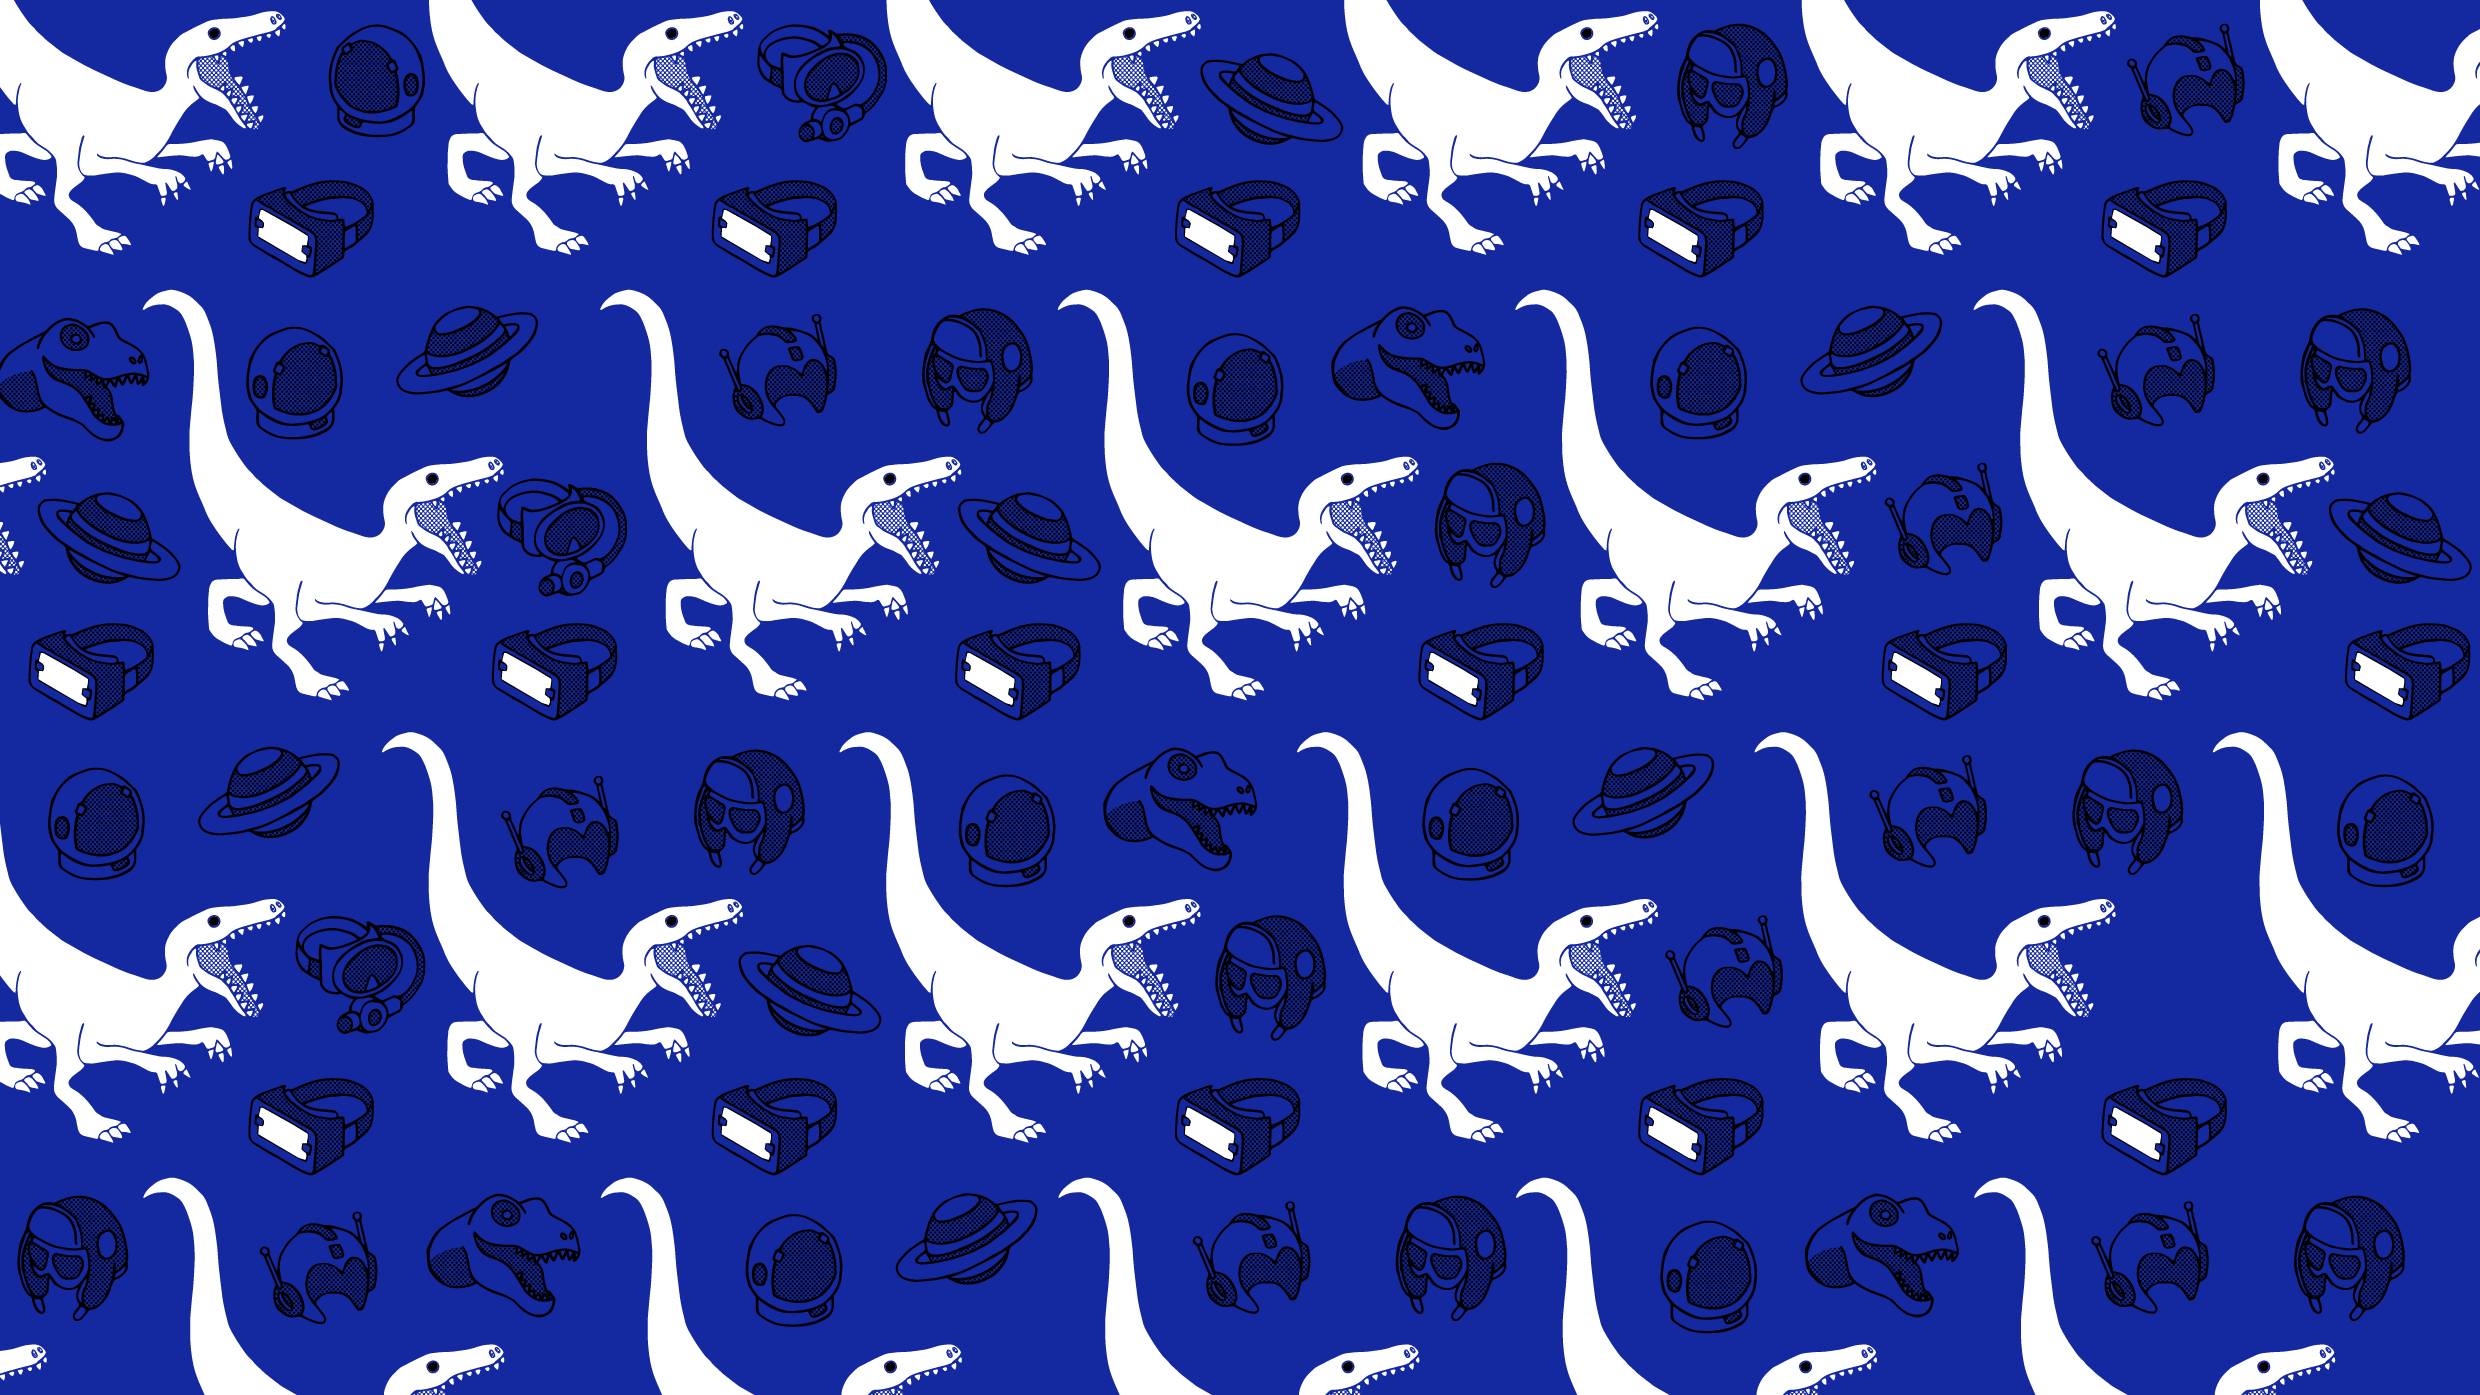 SAMSUNG_Pattern_1_ALTB_2-01.png